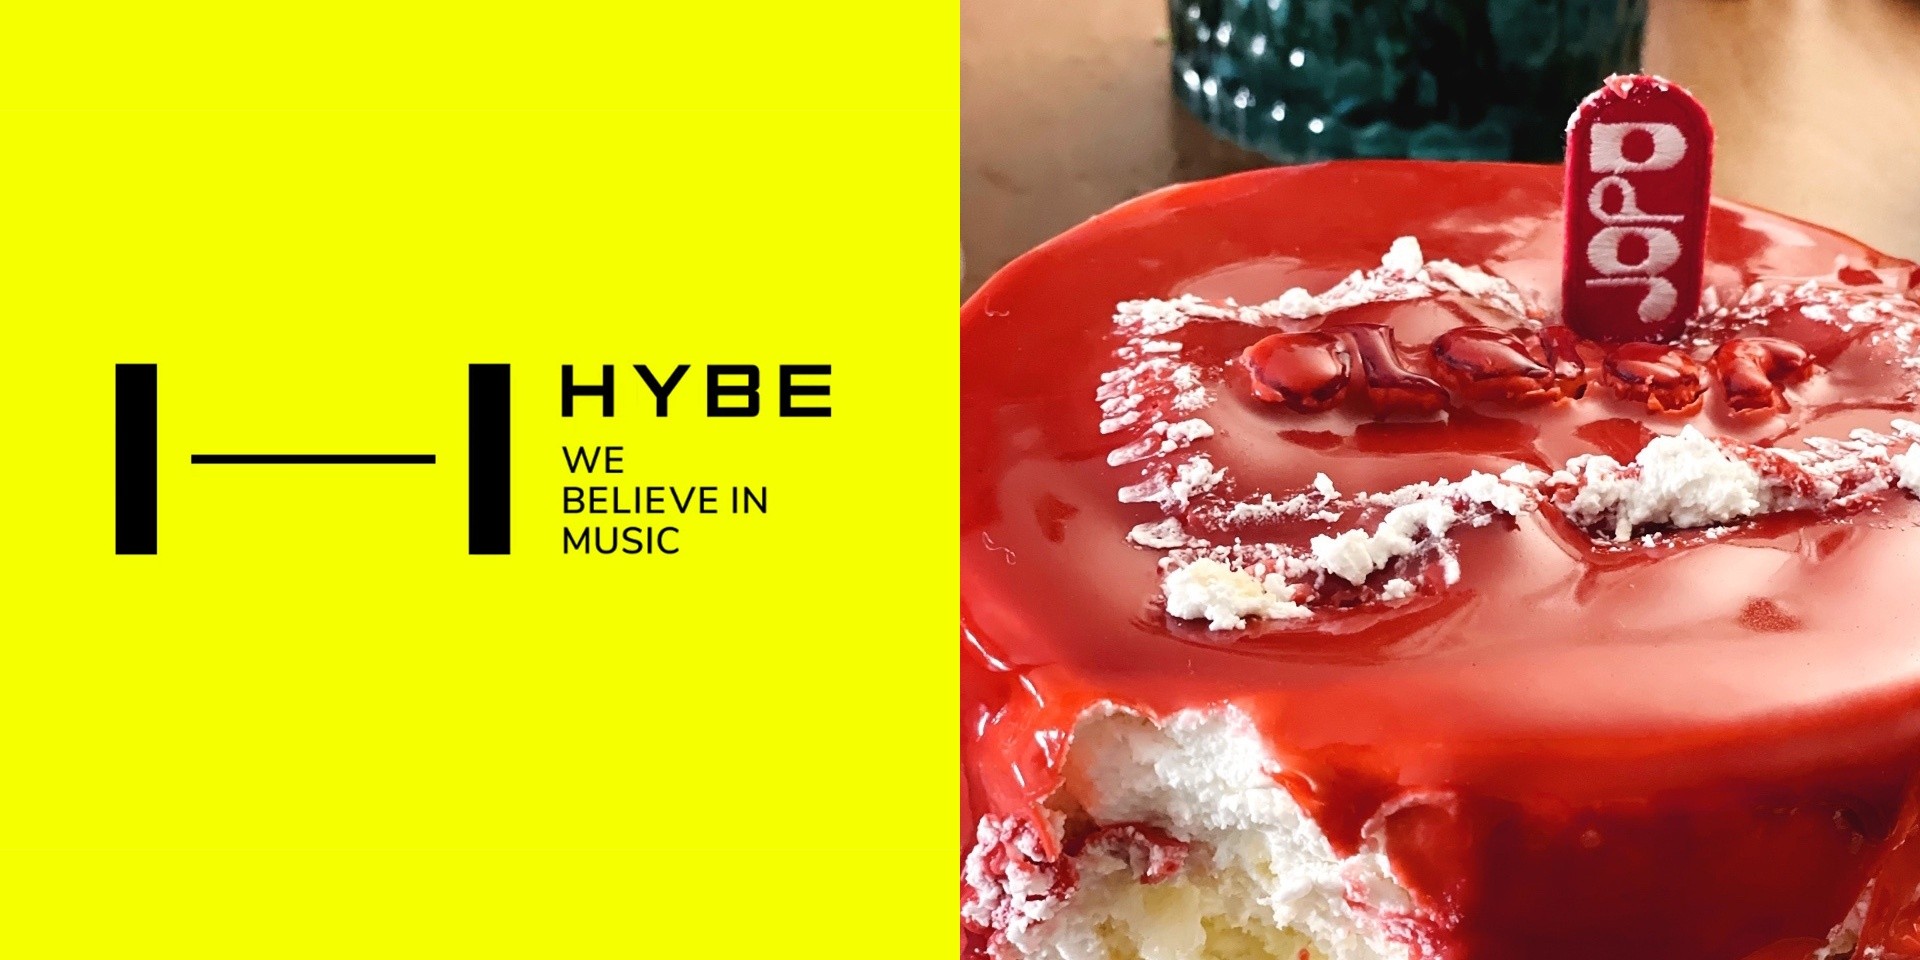 Here's a summary of HYBE's 2021 briefing — webtoons with BTS, TXT, and